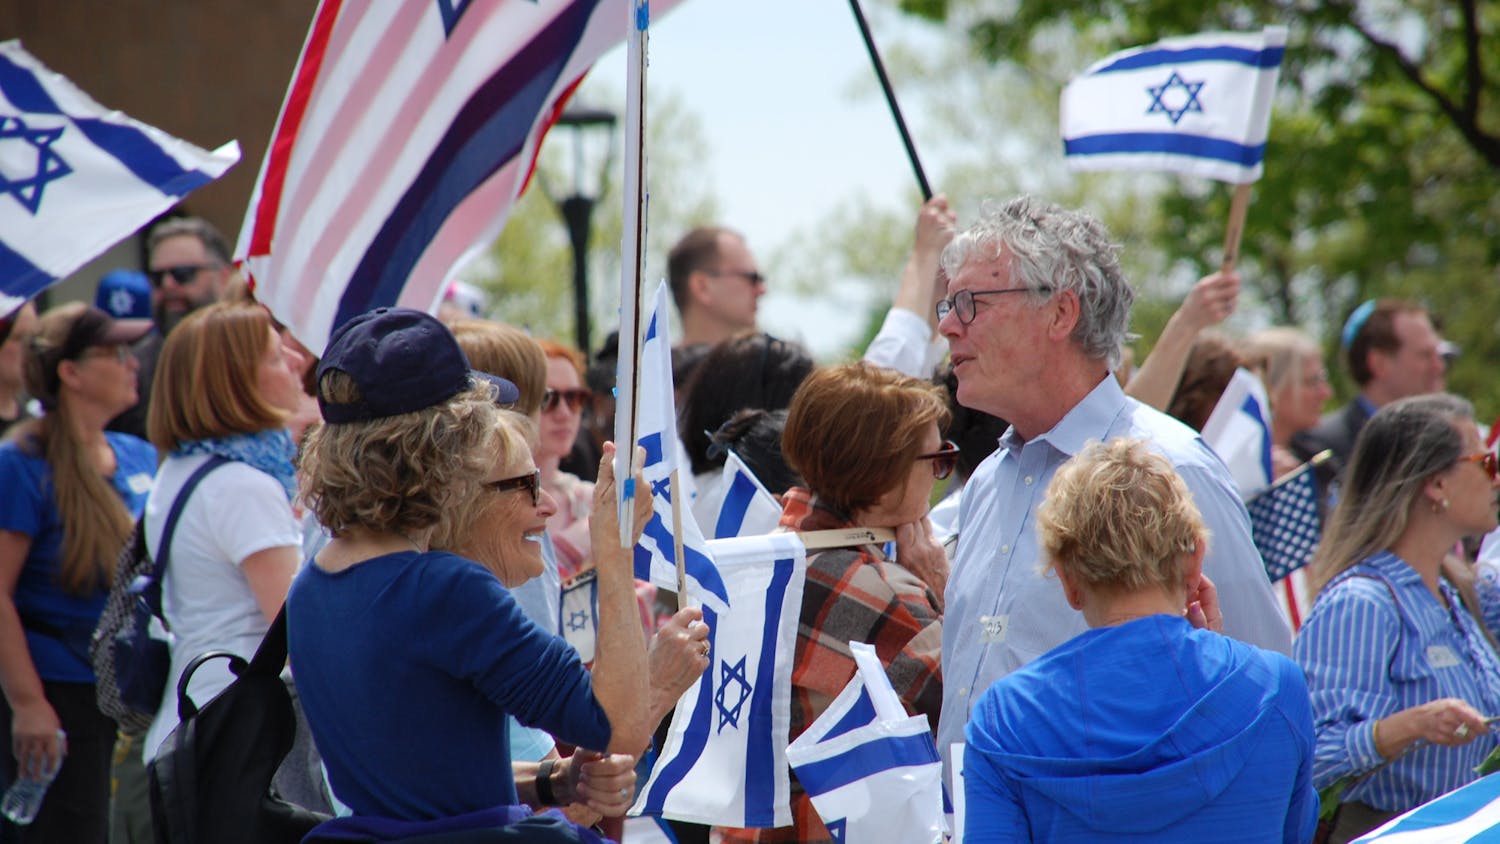 About 75 demonstrators attended Monday's pro-Israel rally organized by the Jewish Student Union (JSU).&nbsp;